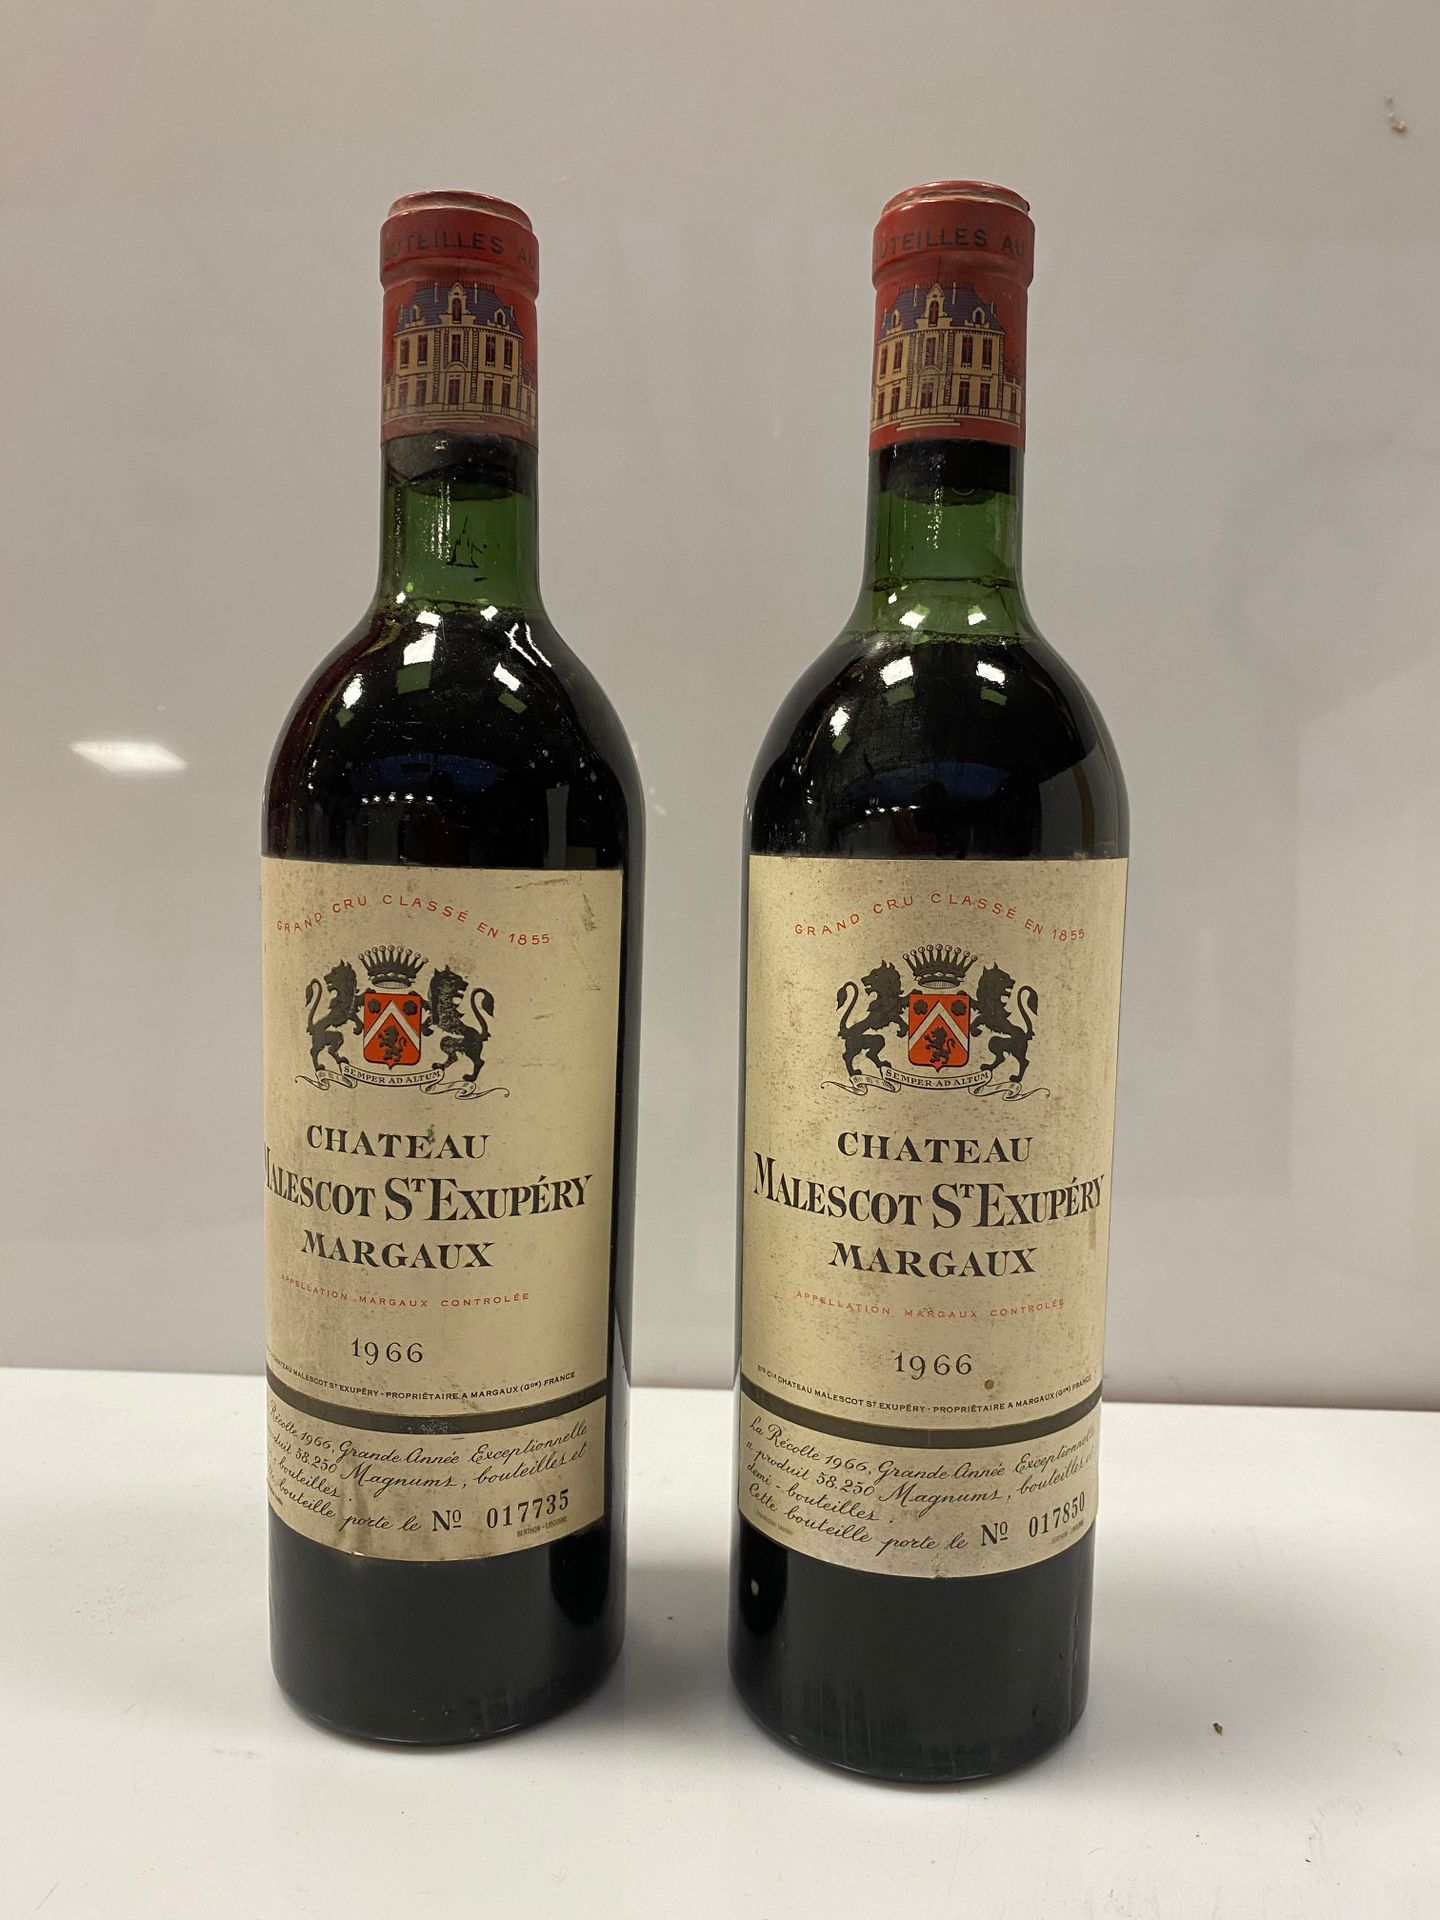 Null 2个Cht Malescot Saint exupery margaux 1966 (Nlb and low neck)